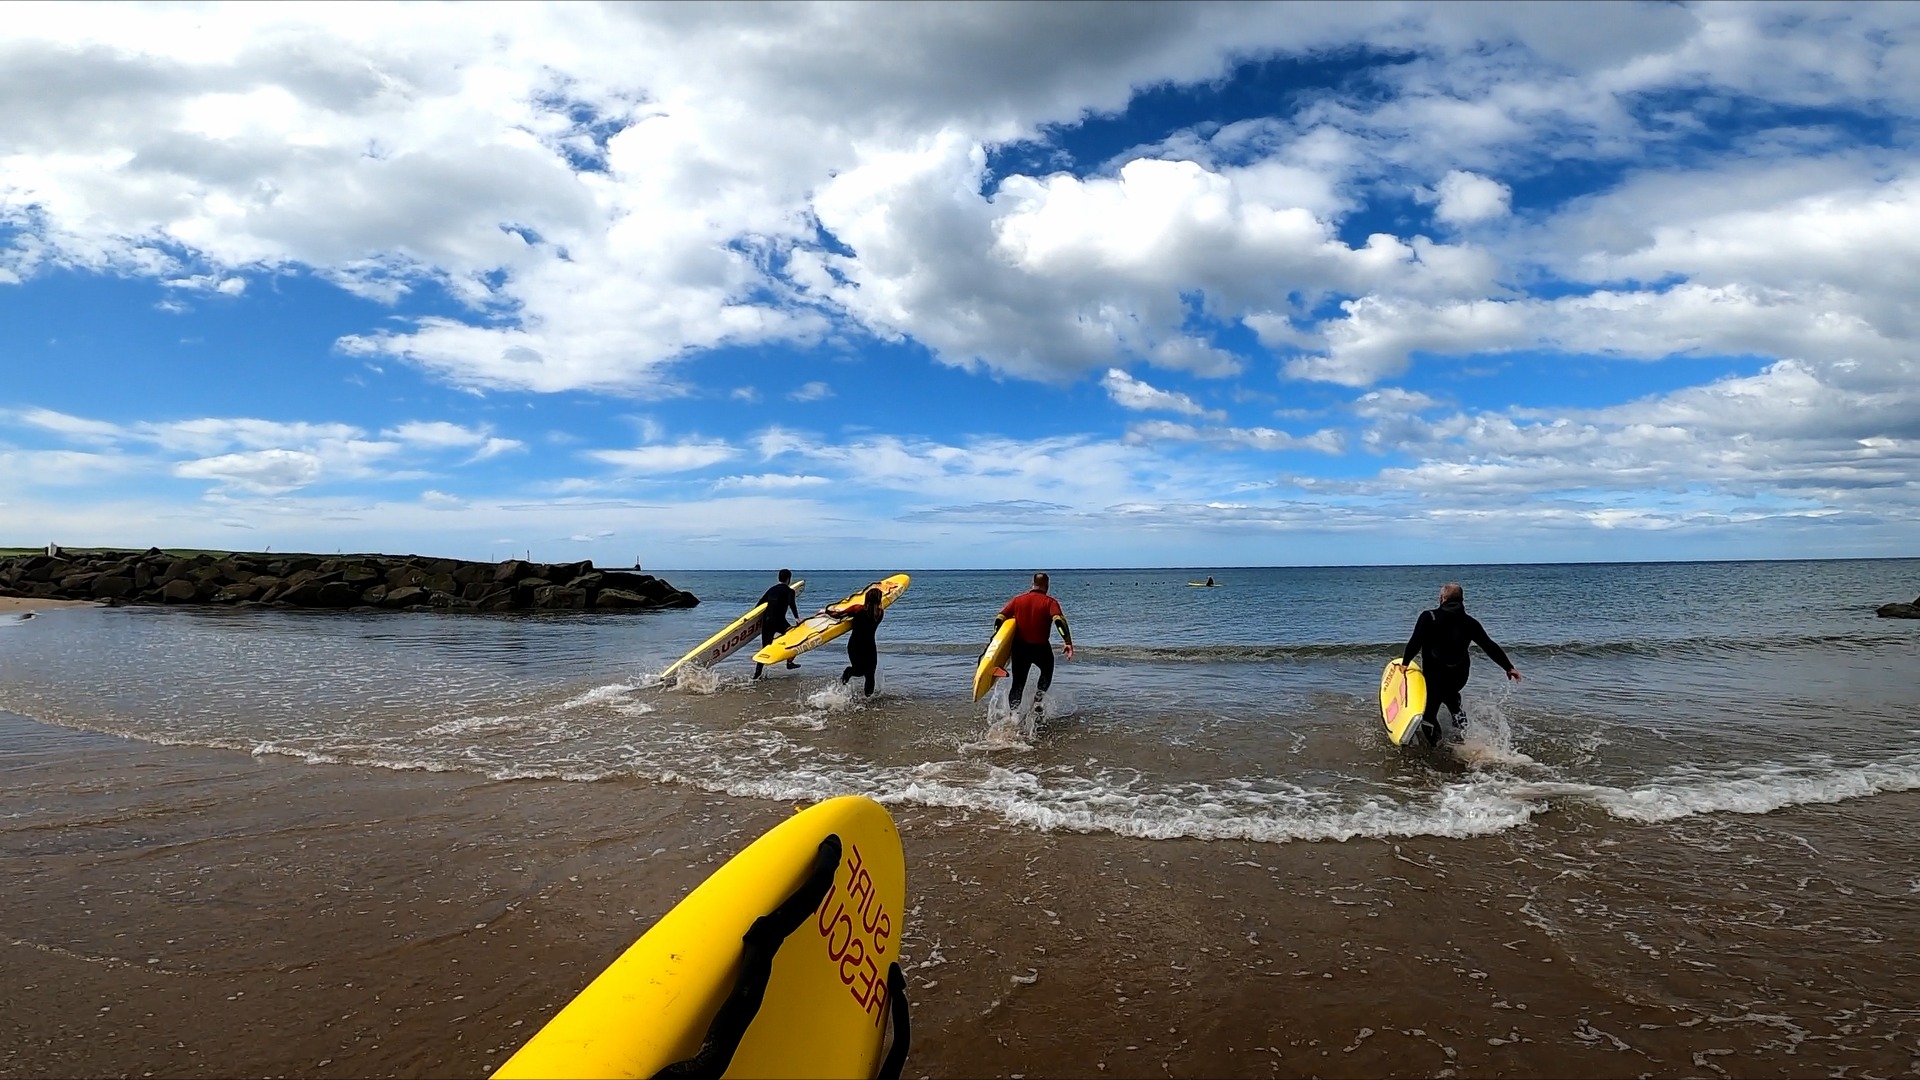 Four lifeguards entering the sea on rescue boards during a training session